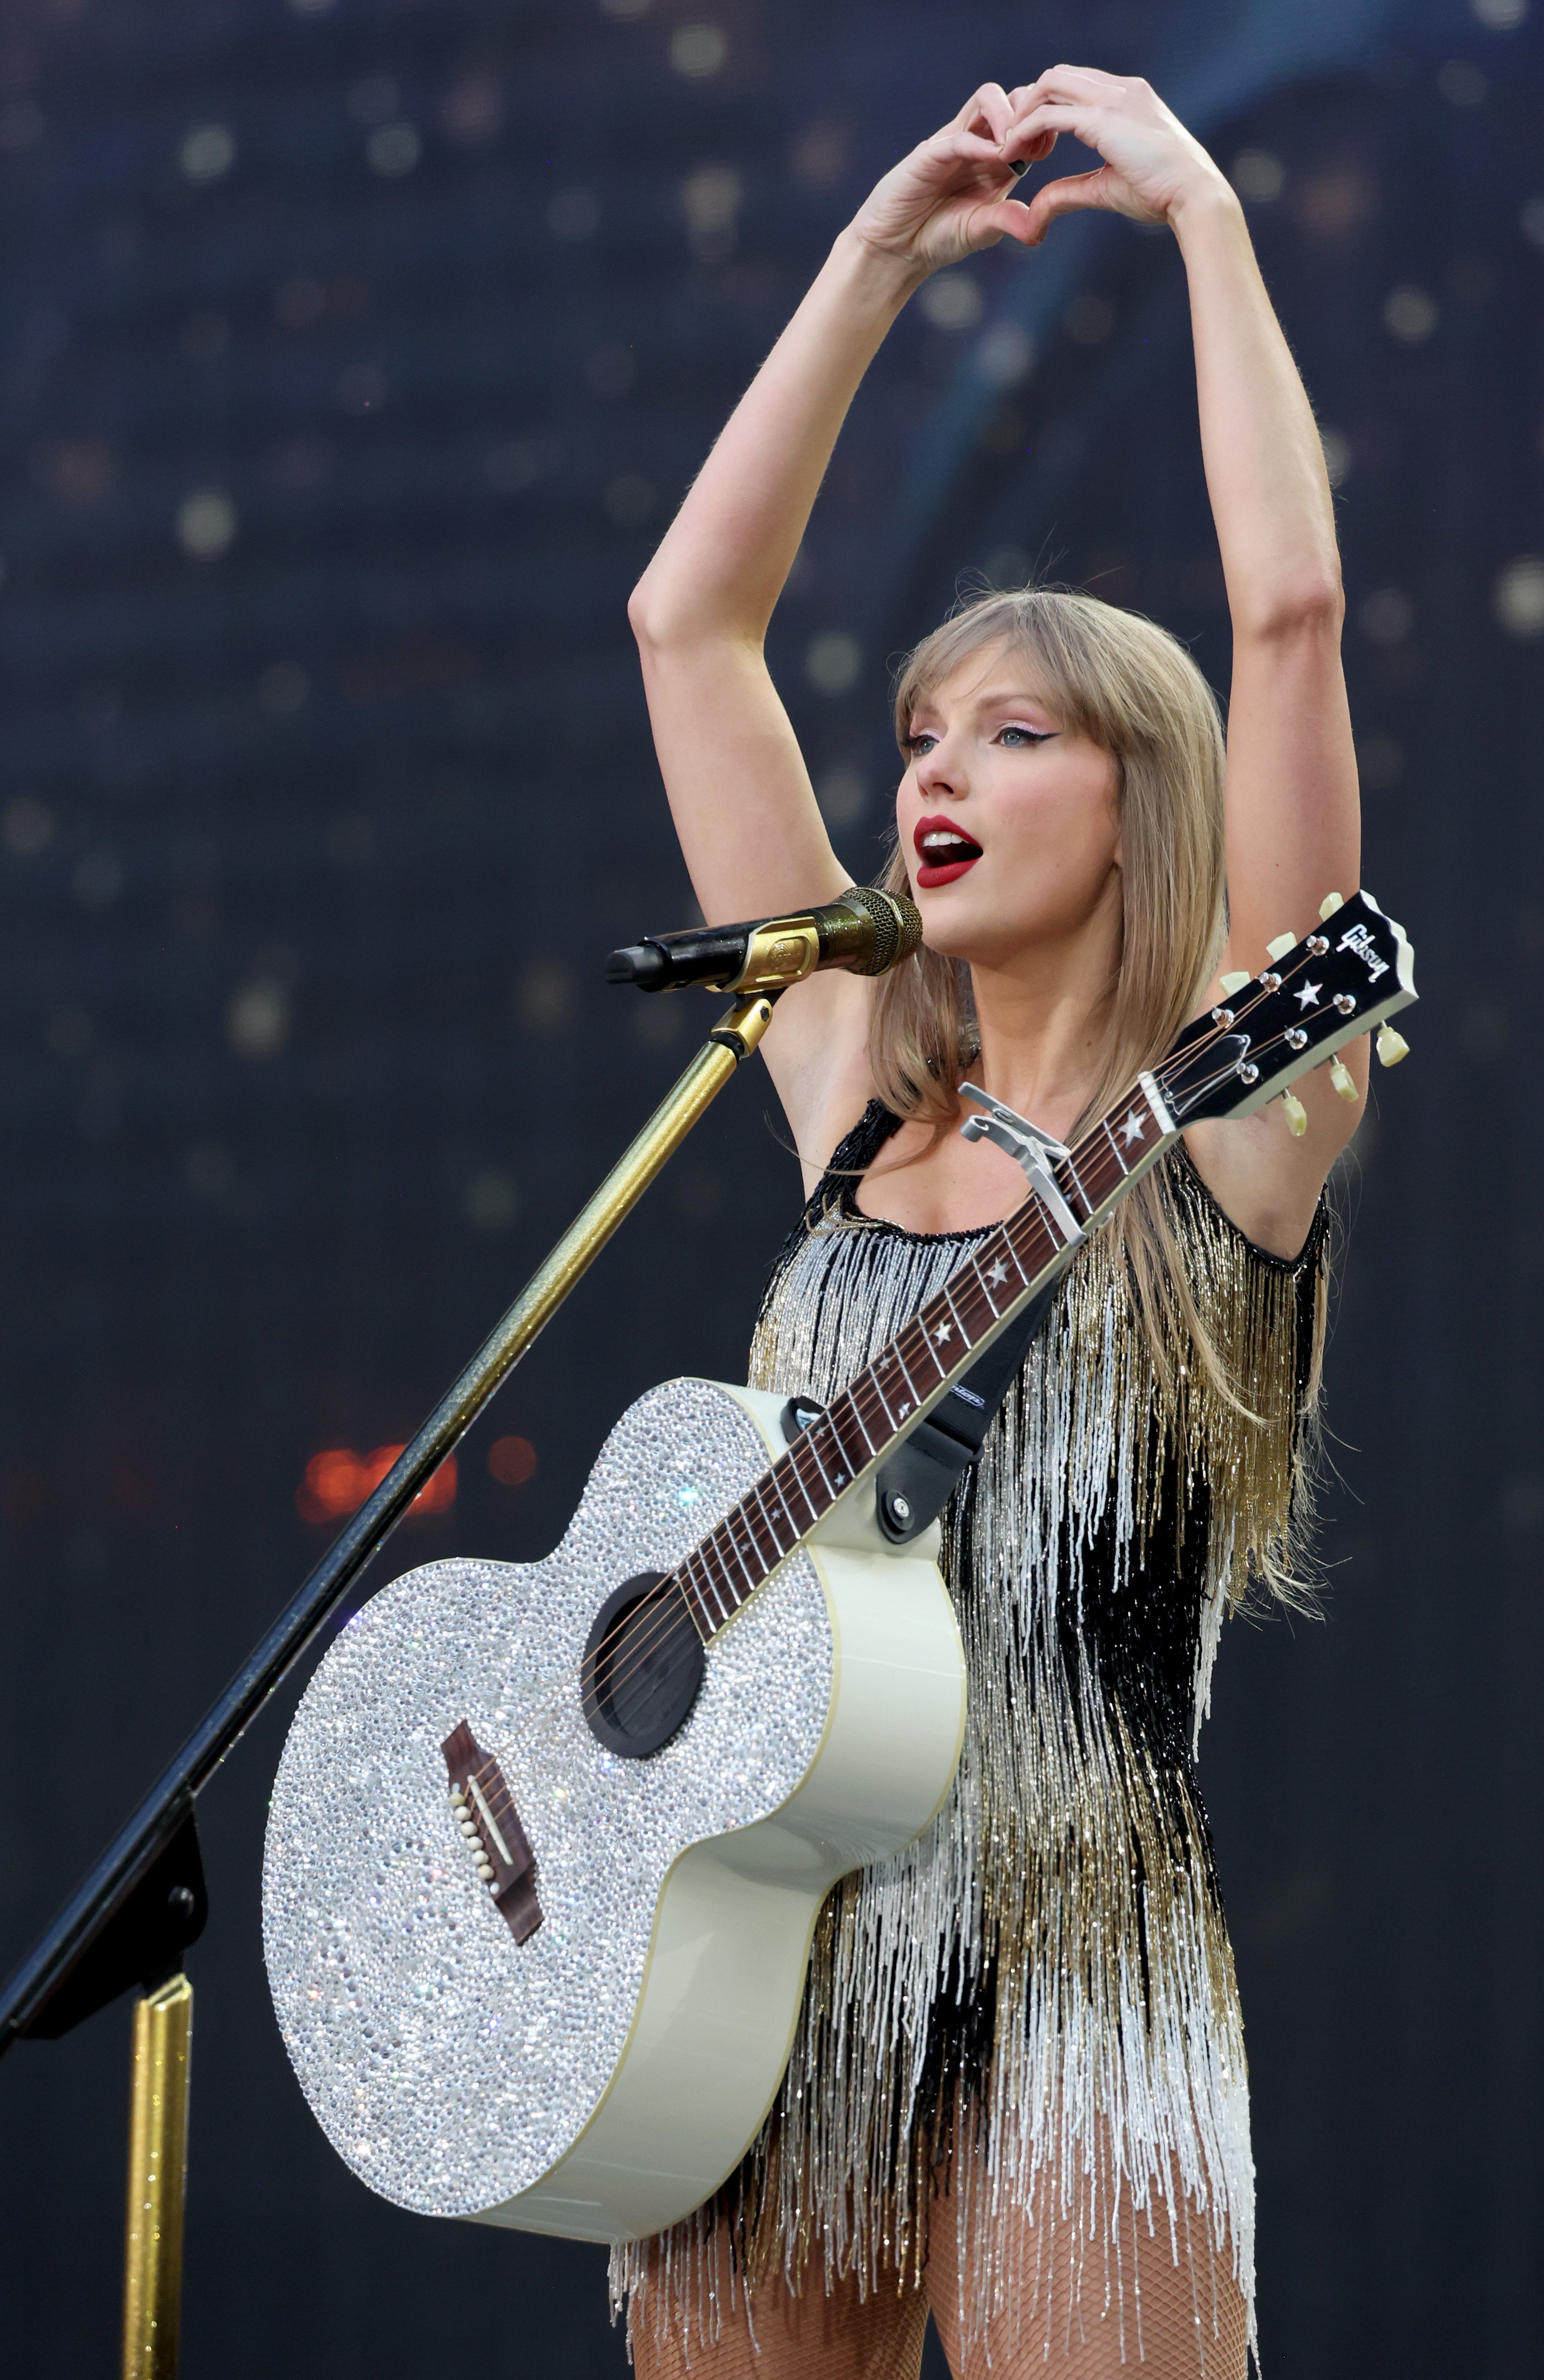 Taylor Swift on stage, wearing a fringed outfit, holding a glittery guitar, making a heart shape with her hands above her head